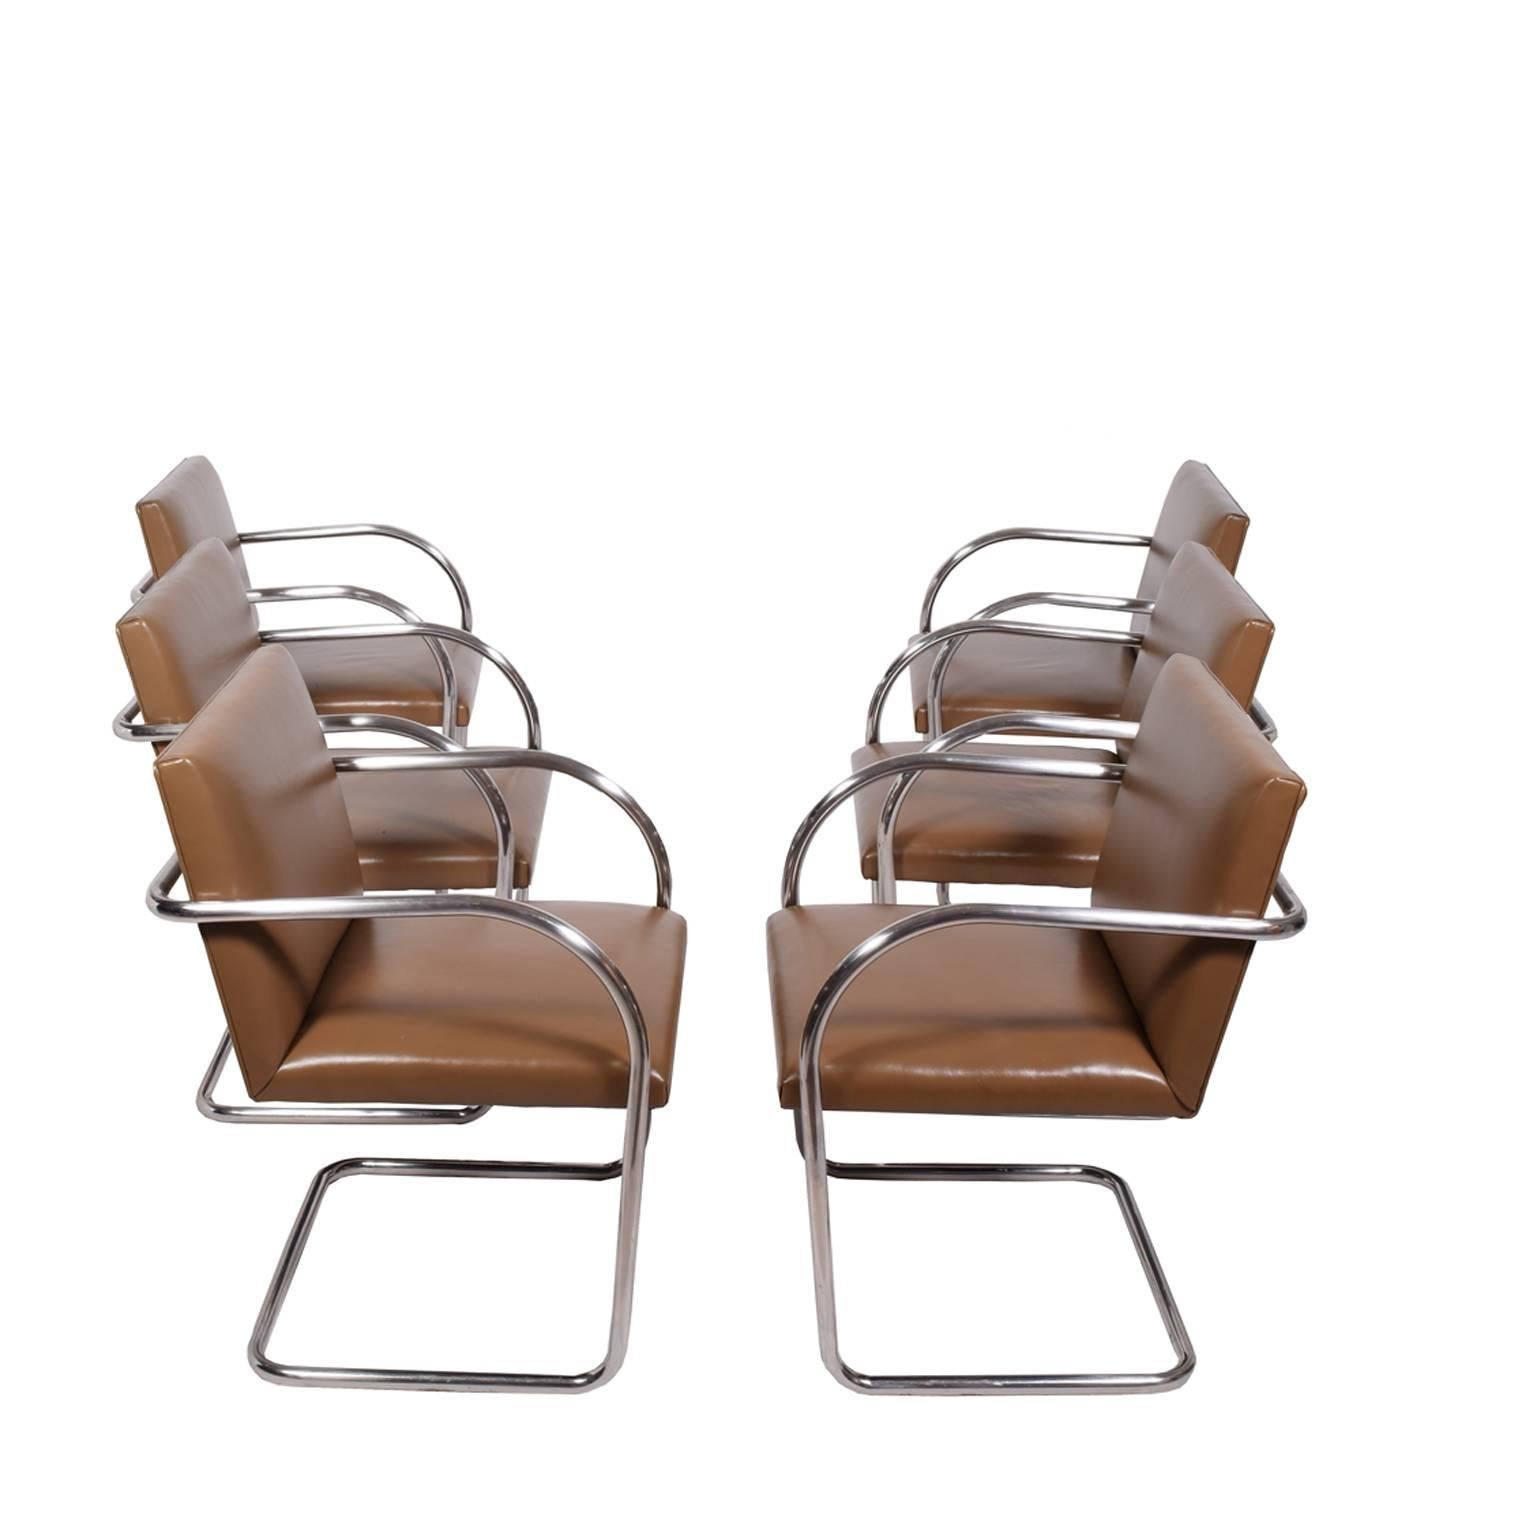 Bauhaus Set of Six Brno Chairs by Mies van der Rohe for Knoll